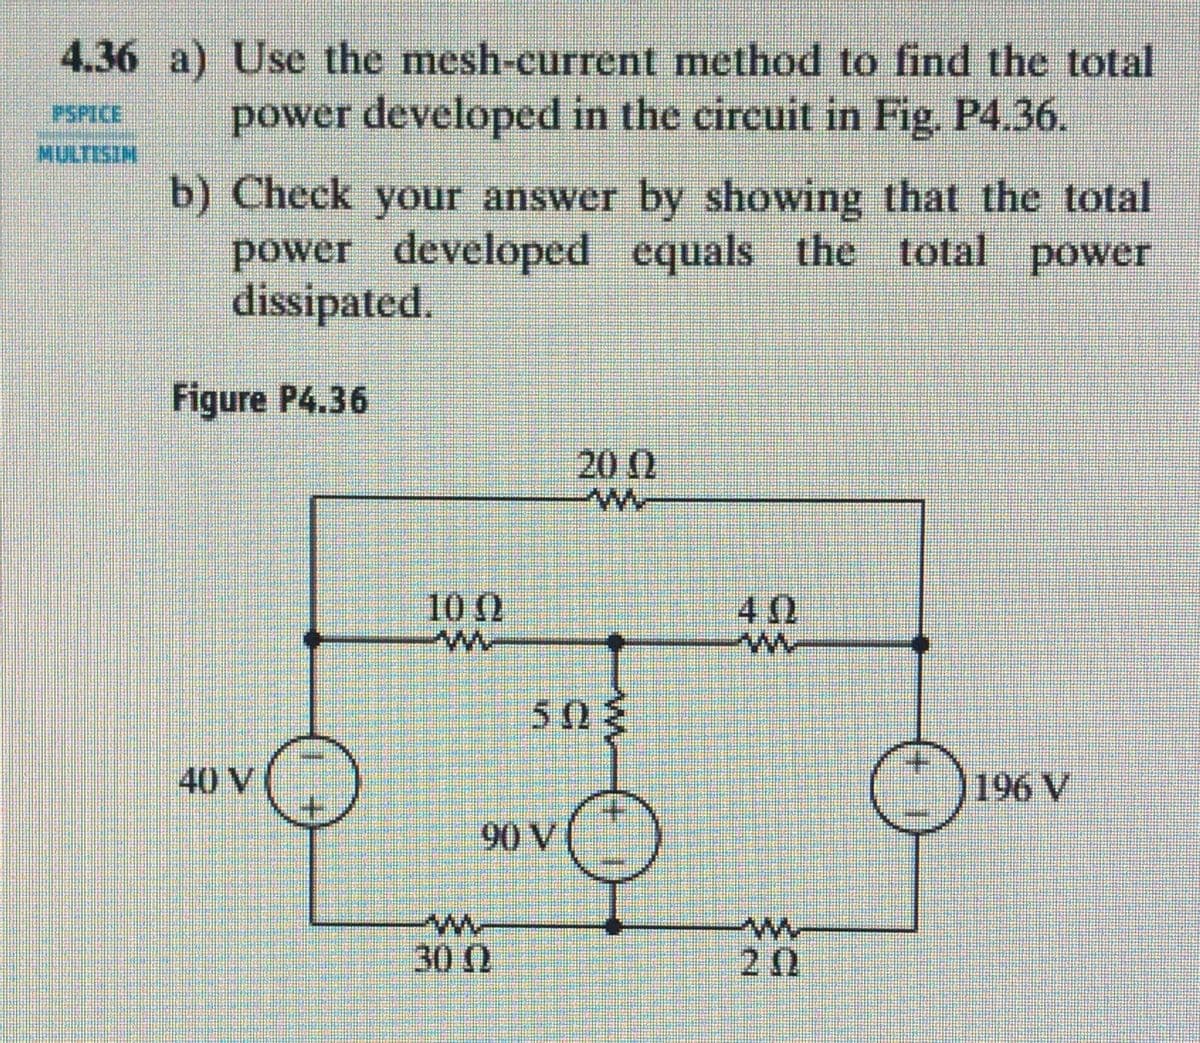 4.36 a) Use the mesh-current method to find the total
power developed in the circuit in Fig. P4.36.
PSPICE
NESUN
b) Check your answer by showing that the total
power developed equals the total power
dissipated.
Figure P4.36
20 0
10 0
40
5 03
40 V
196 V
90 V
30 0
20
